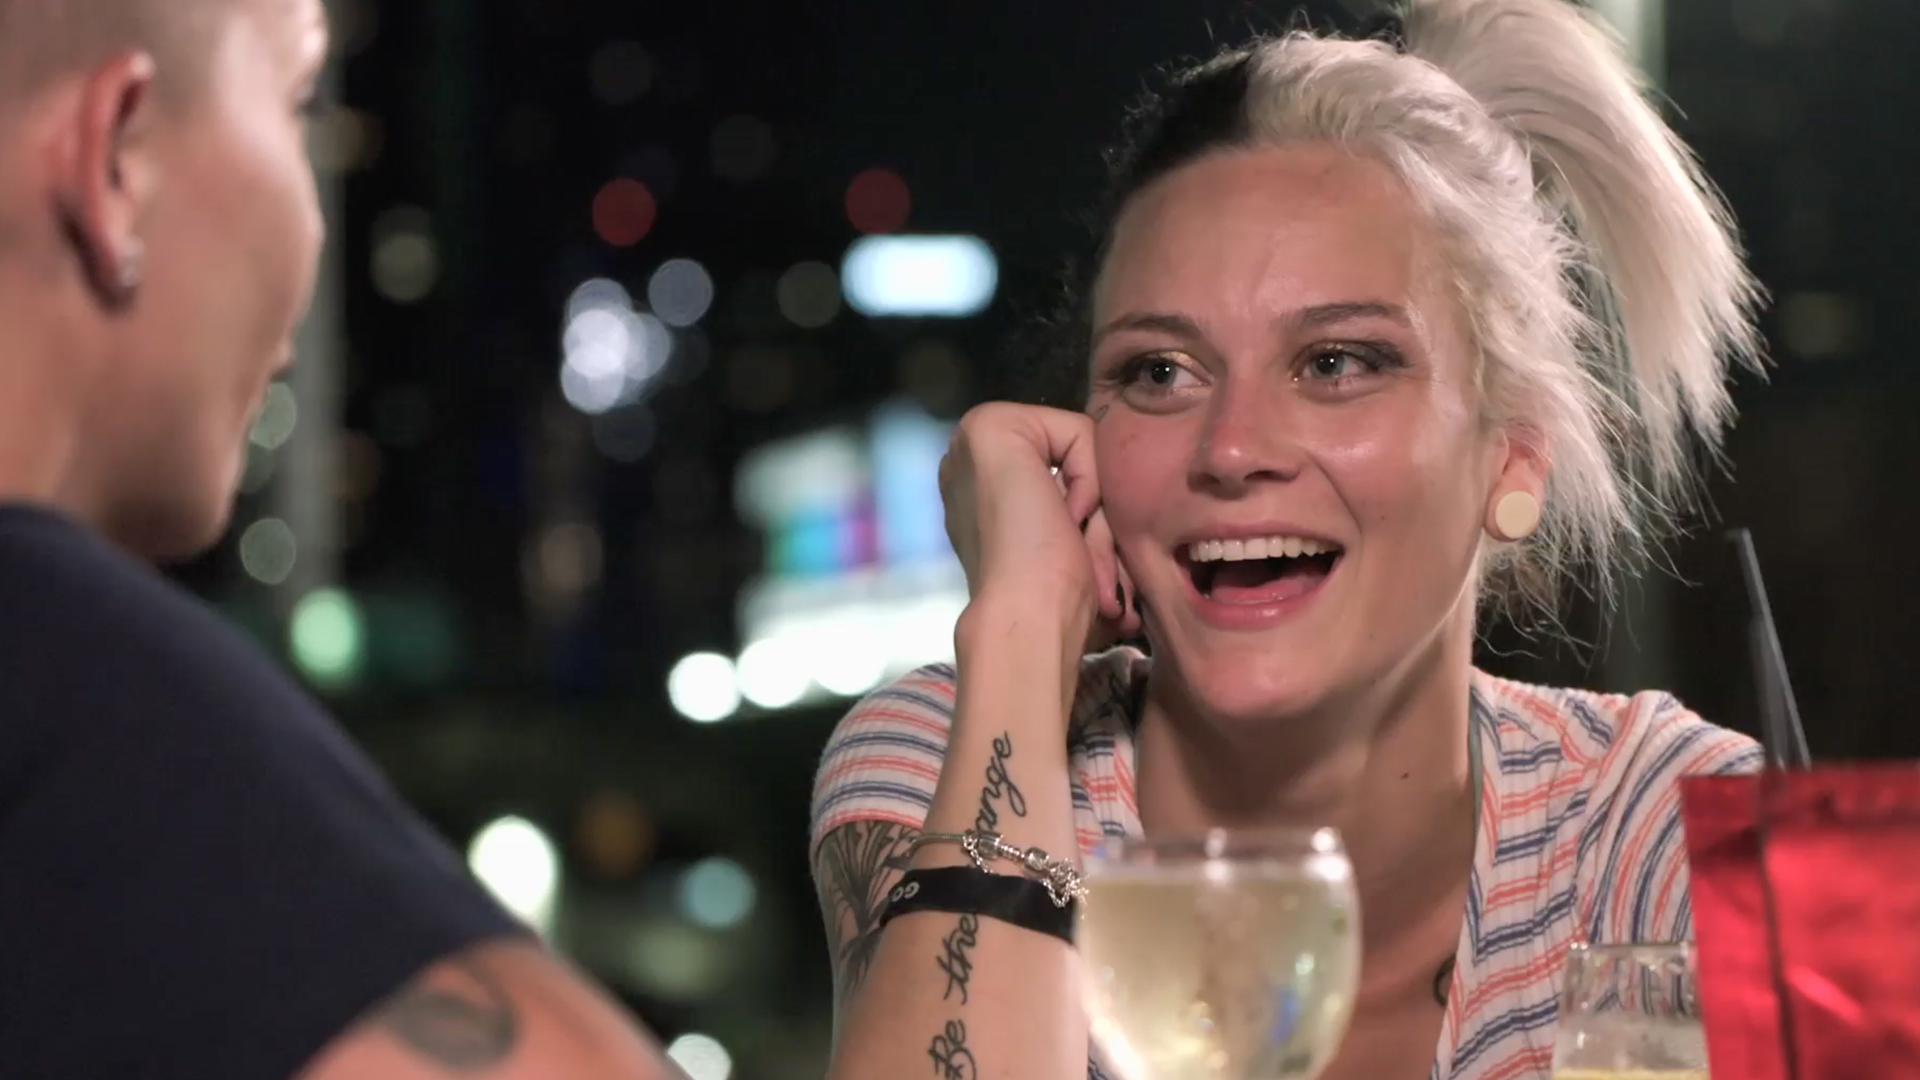 Watch Overheard: 'I Consider Myself Promiscuous' | Love During Lockup Video Extras